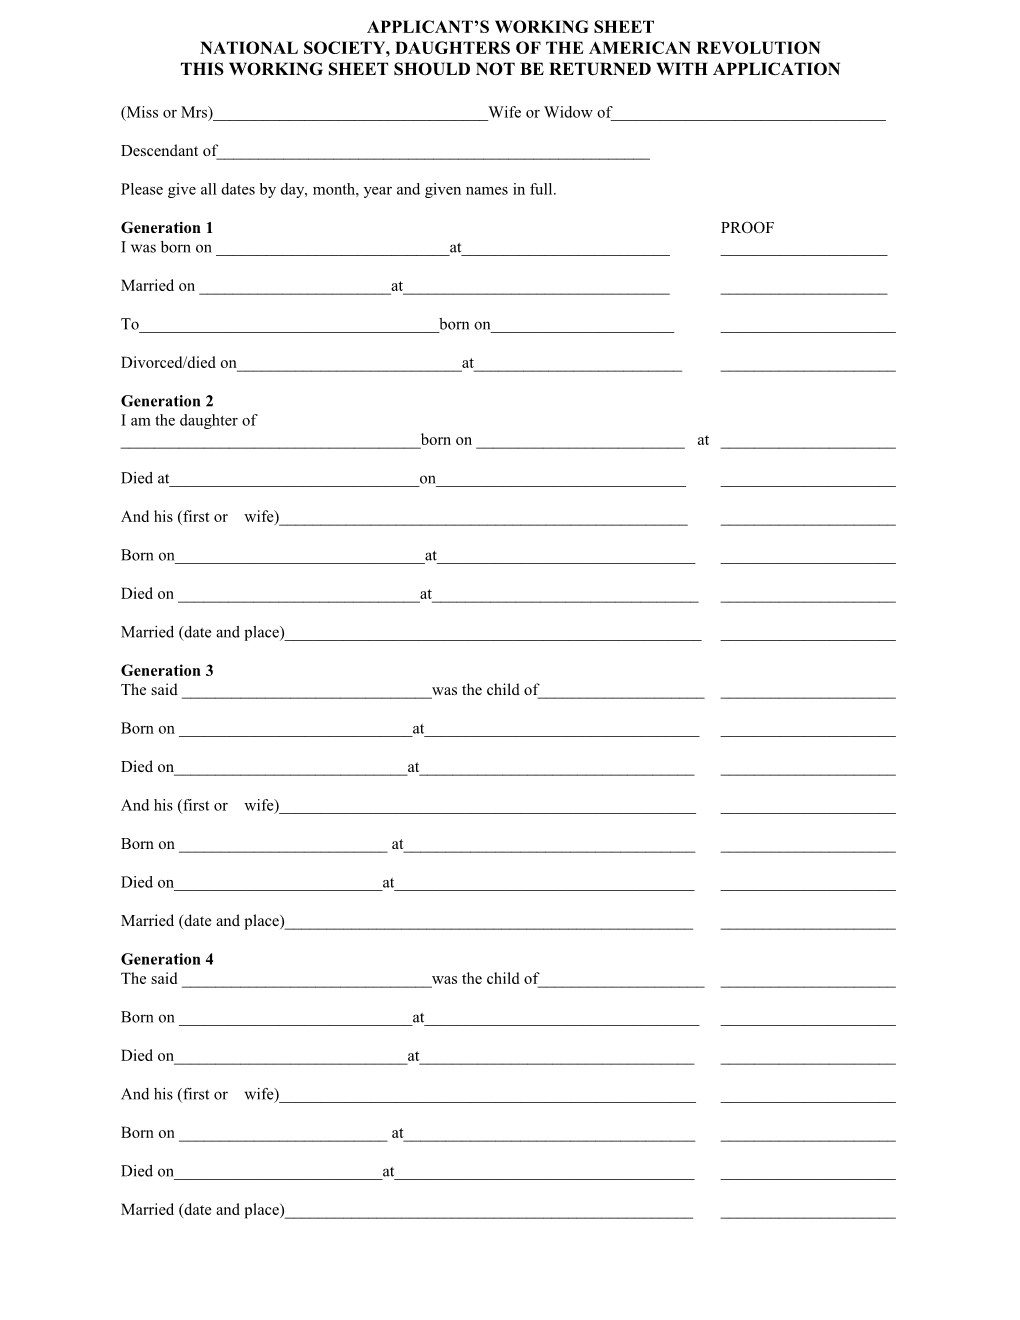 Applicant S Working Sheet